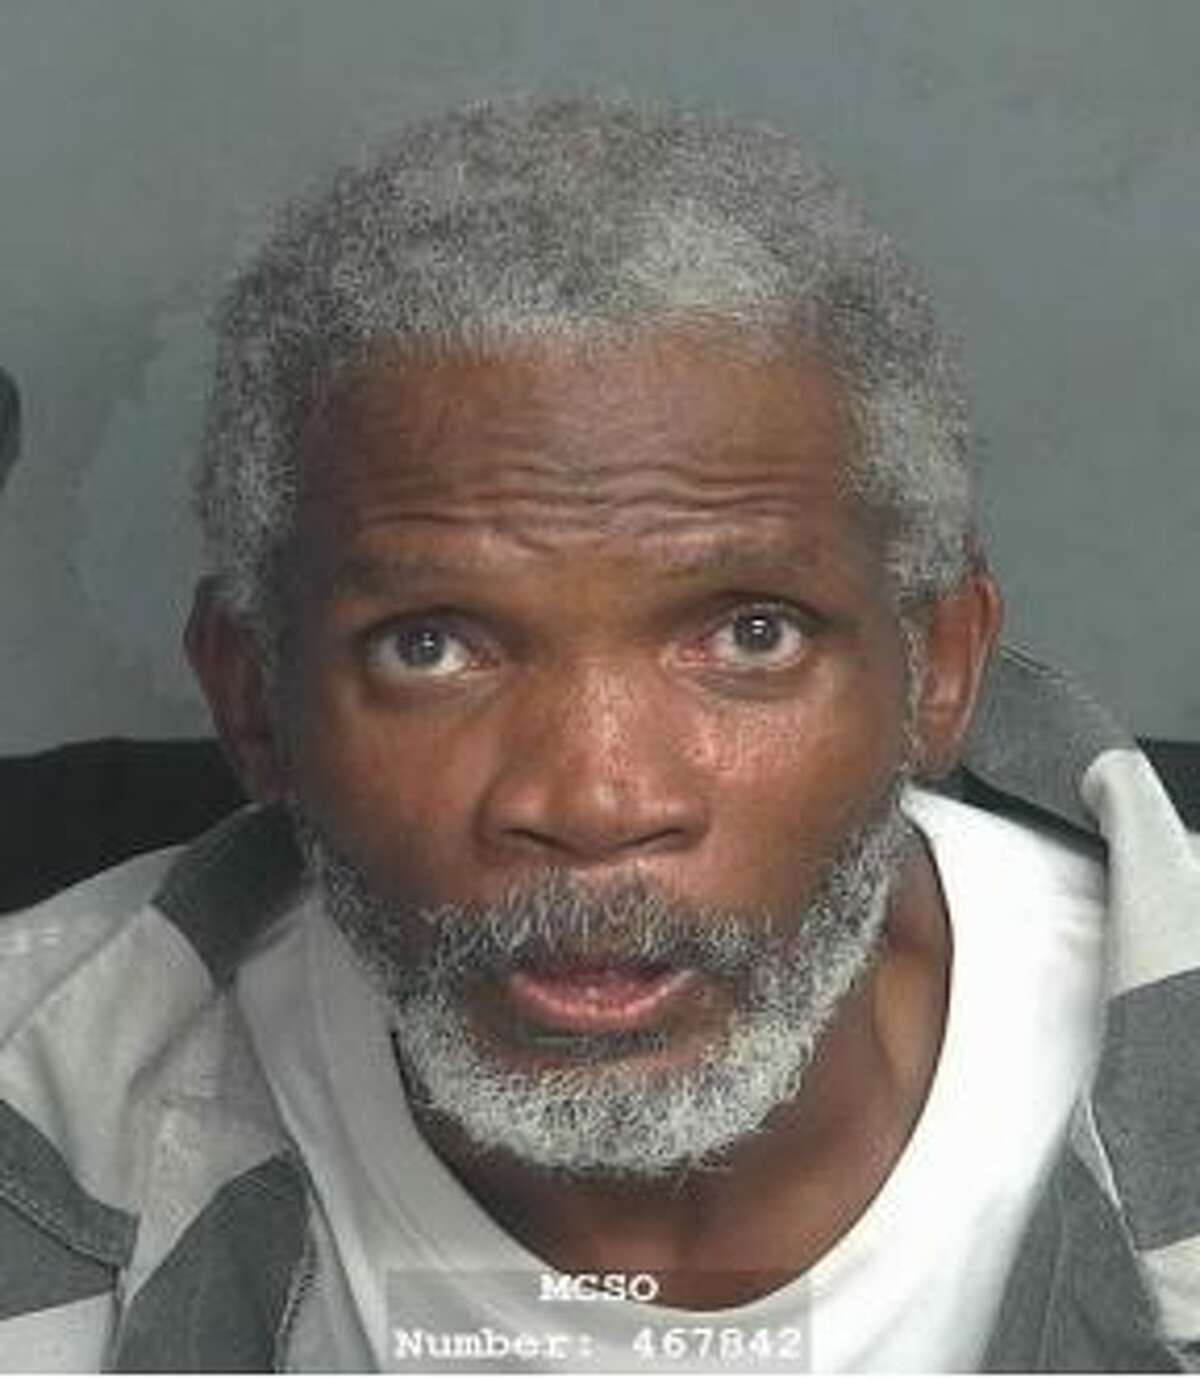 Anthony Johnson, 57 of Houston, was arrested and charged with possession of marijuana.  